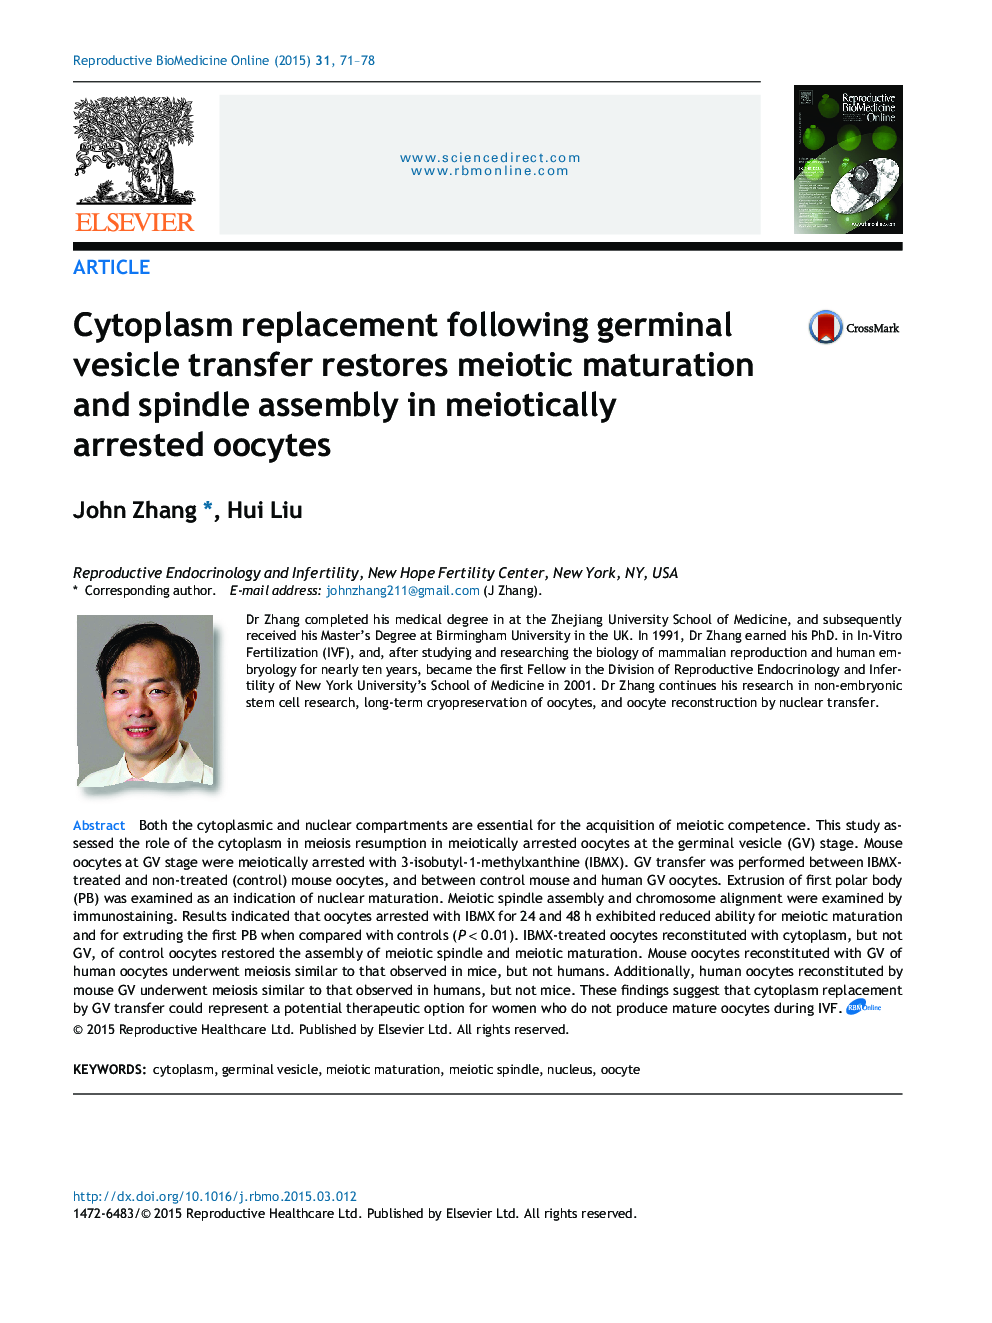 Cytoplasm replacement following germinal vesicle transfer restores meiotic maturation and spindle assembly in meiotically arrested oocytes